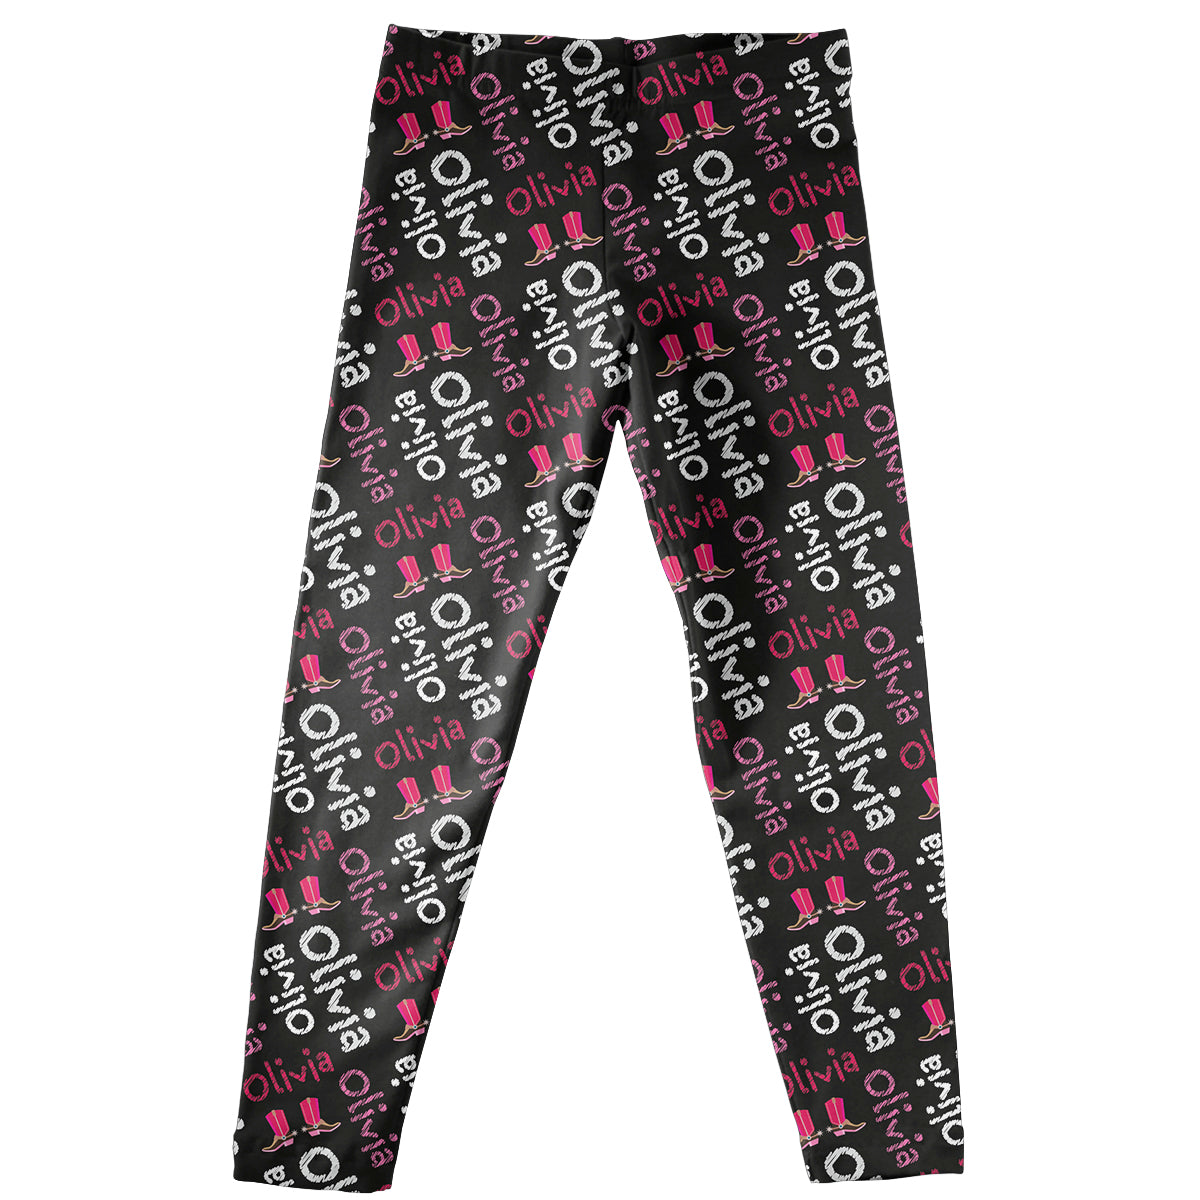 Cowgirl Boots and Name Print Black Leggings - Wimziy&Co.